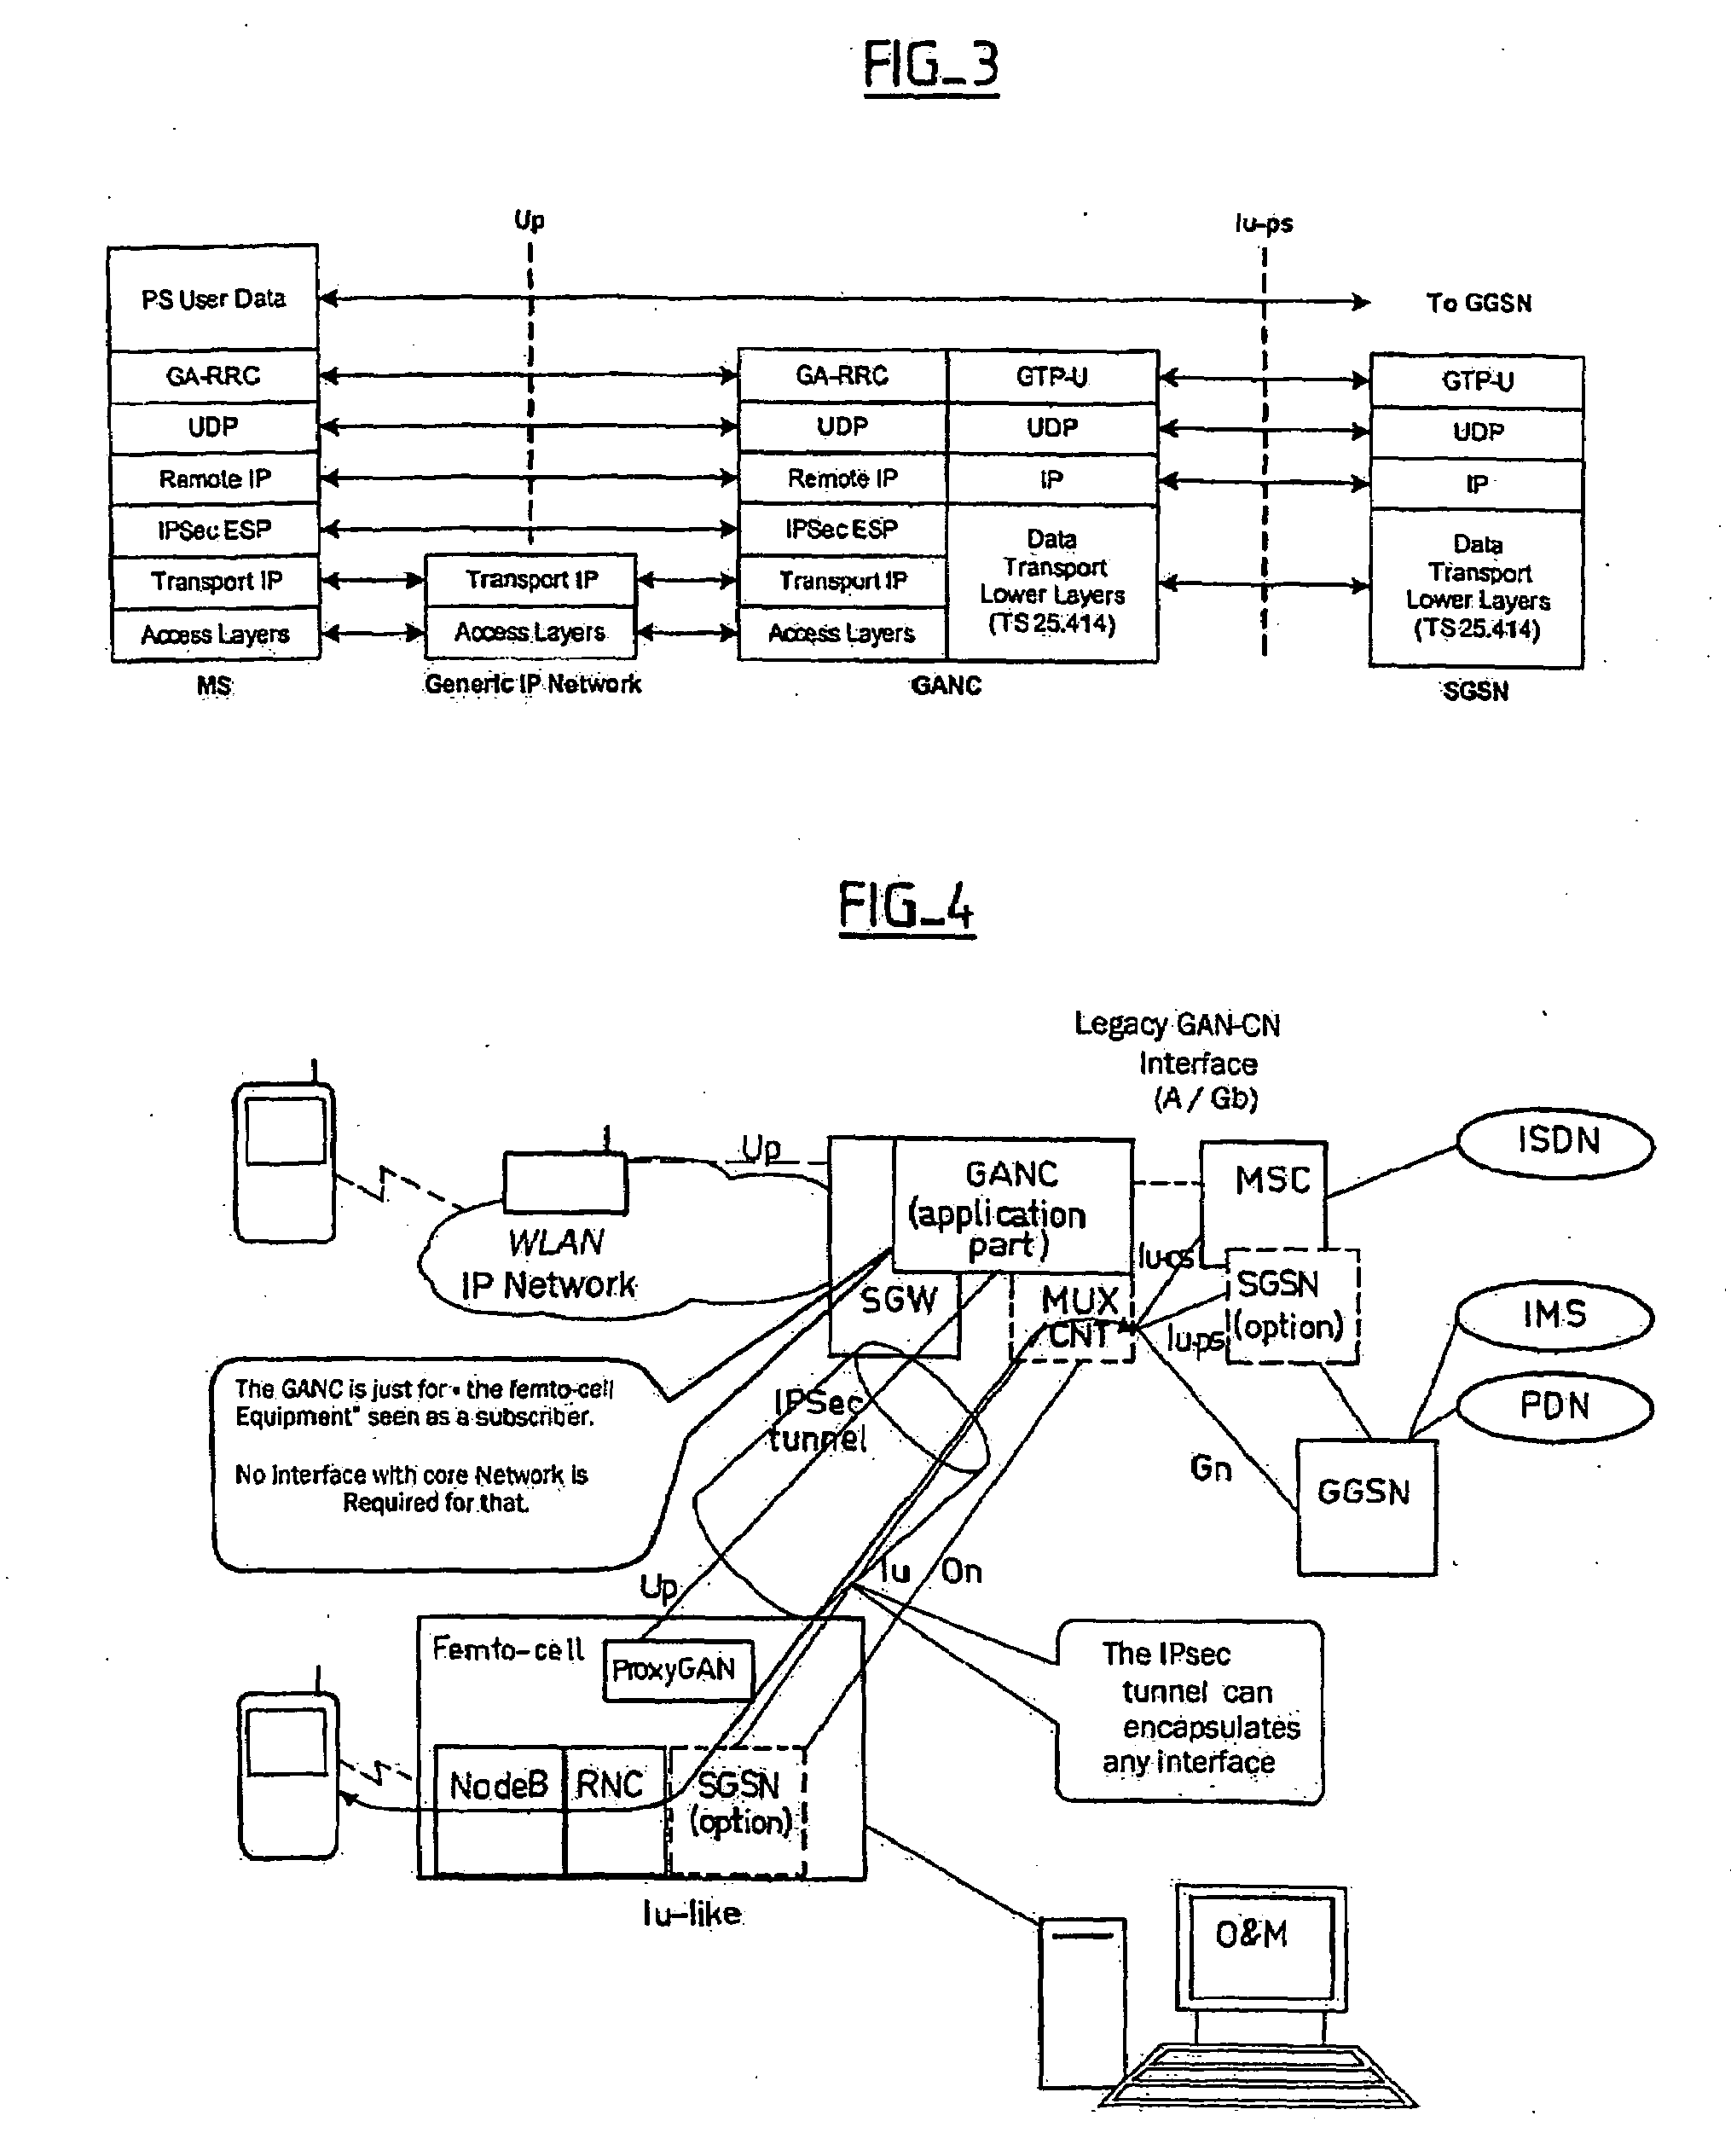 Method for interfacing a femto-cell equipment with a mobile core network